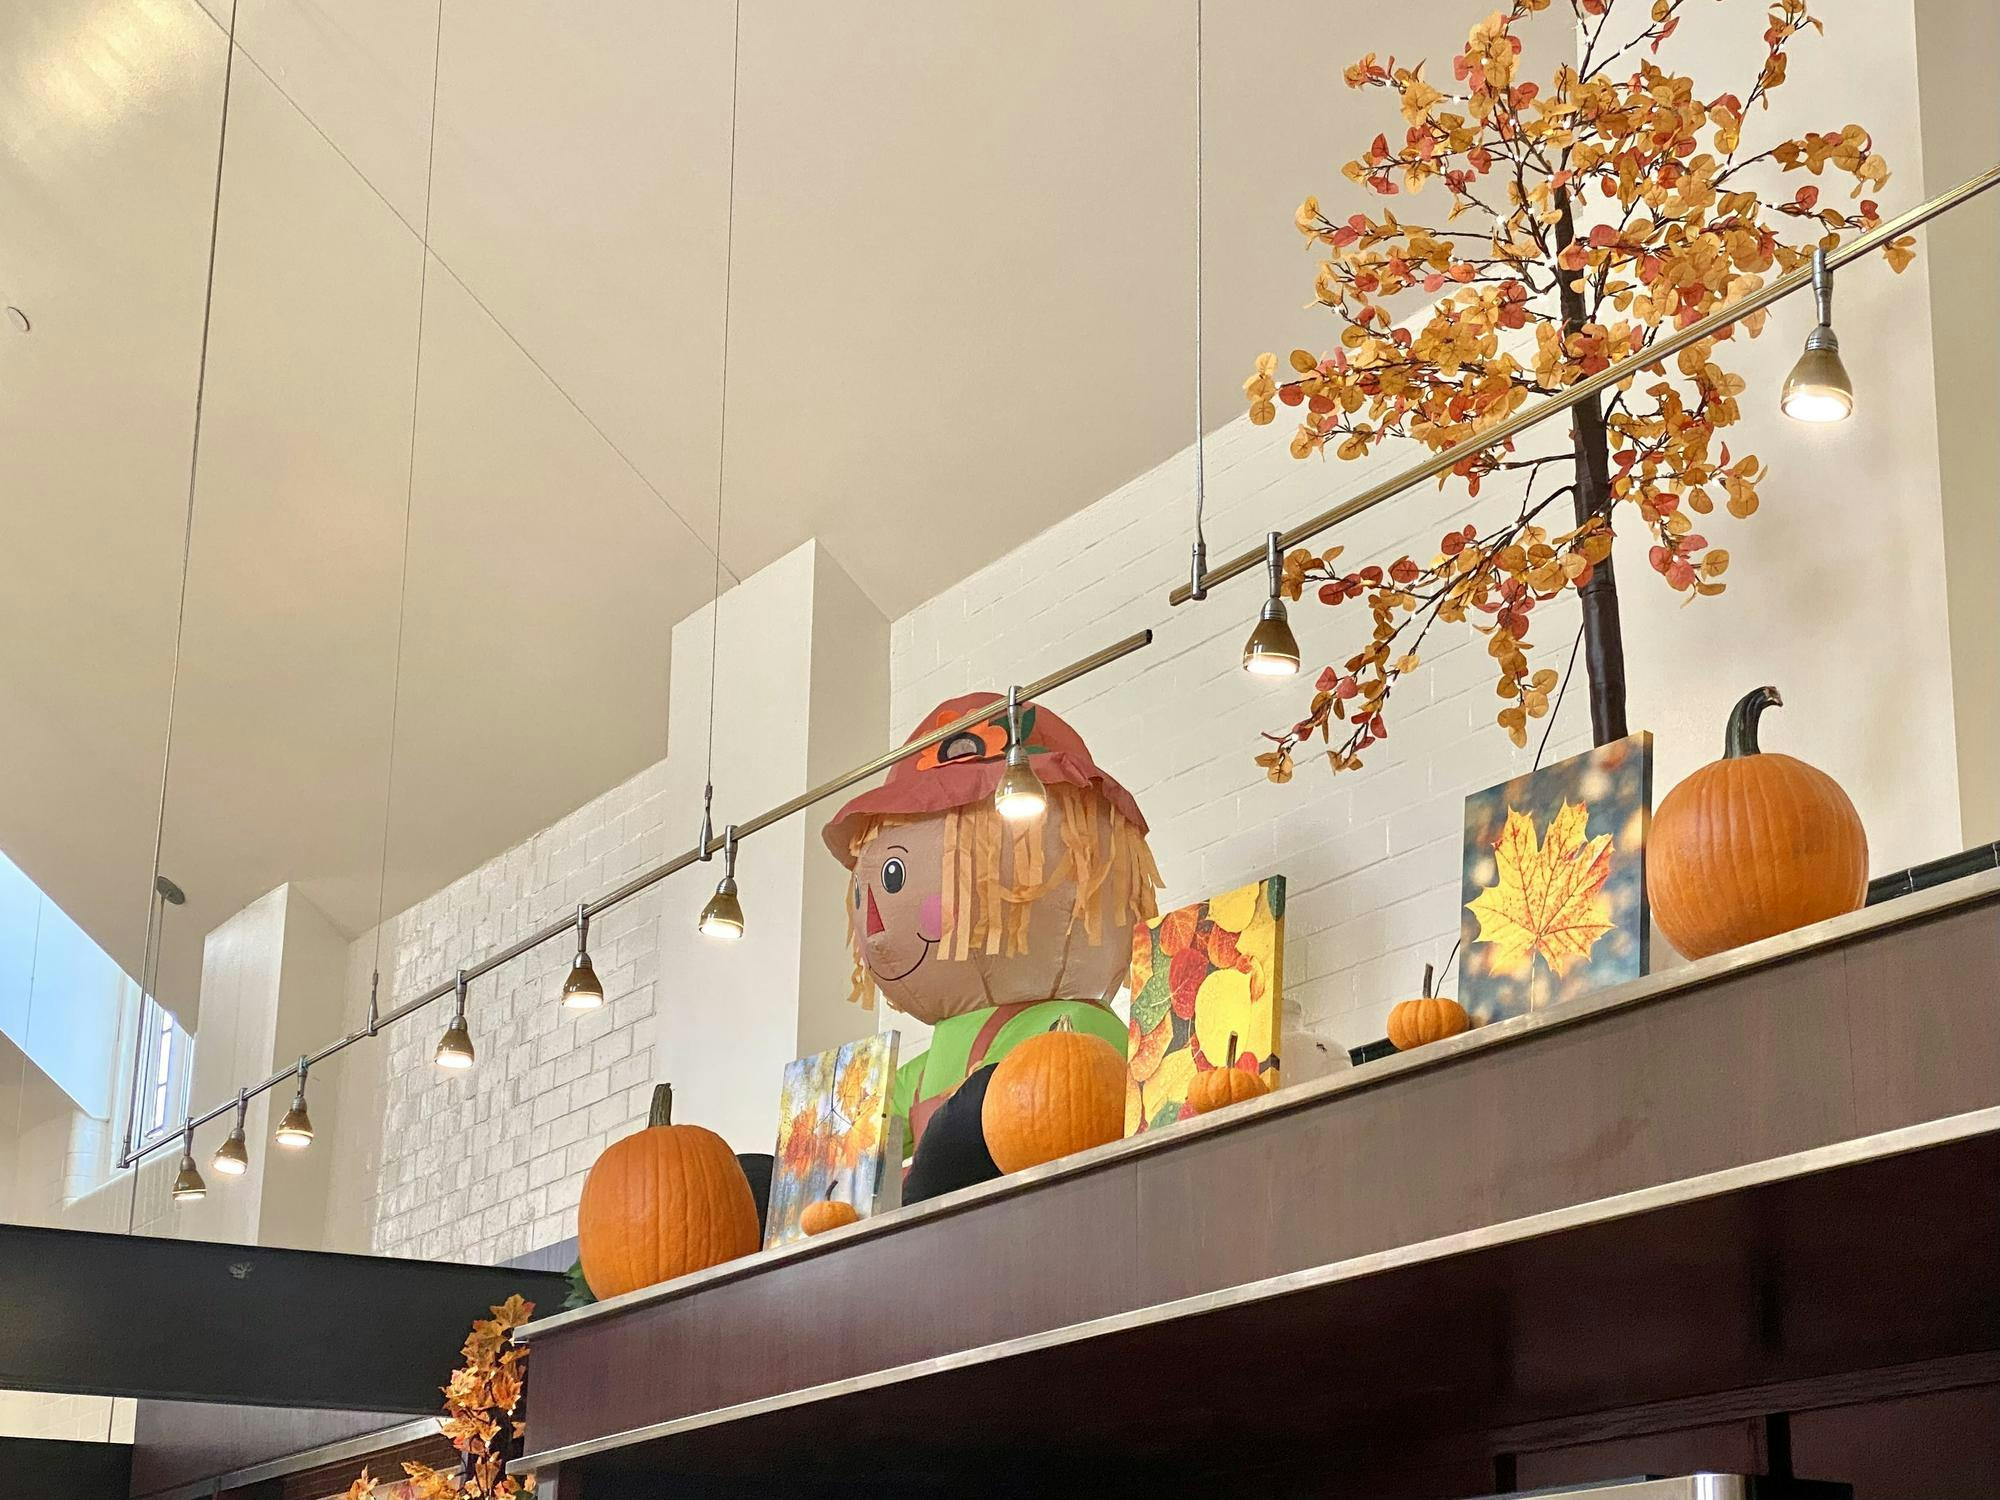 An inflatable scarecrow figure and fall foliage leaves are places on the ledges of the dining hall ceiling. 